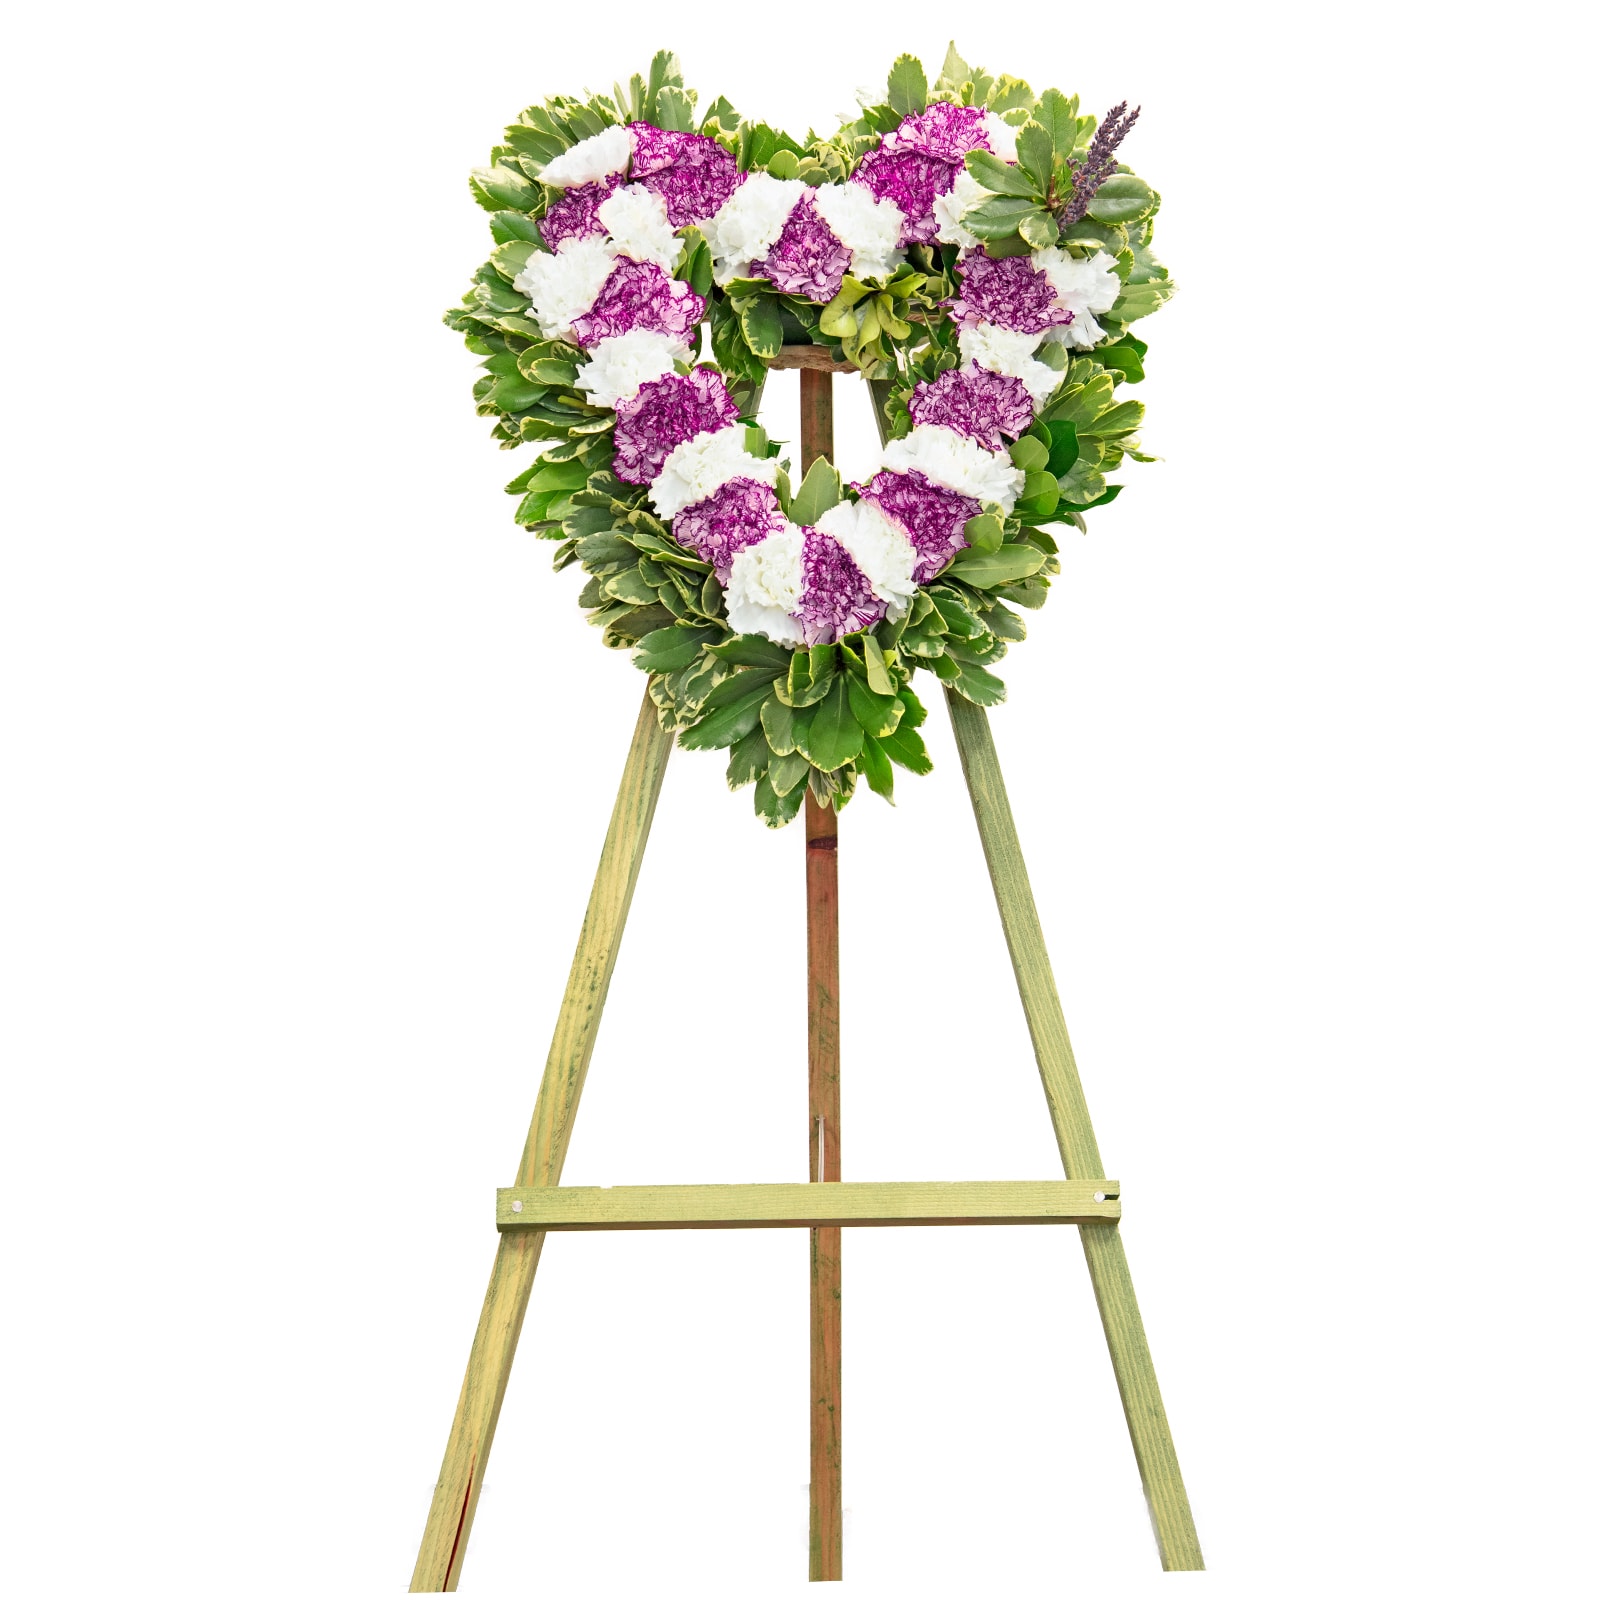 The &quot;Lovely&quot; Spray - Want something lovely for your special event? This heart shaped spray is fully customizable for any occasion including birthdays, graduations, and funerals. Please indicate in the special instructions color preferences, or give us a call to consult with more detail.